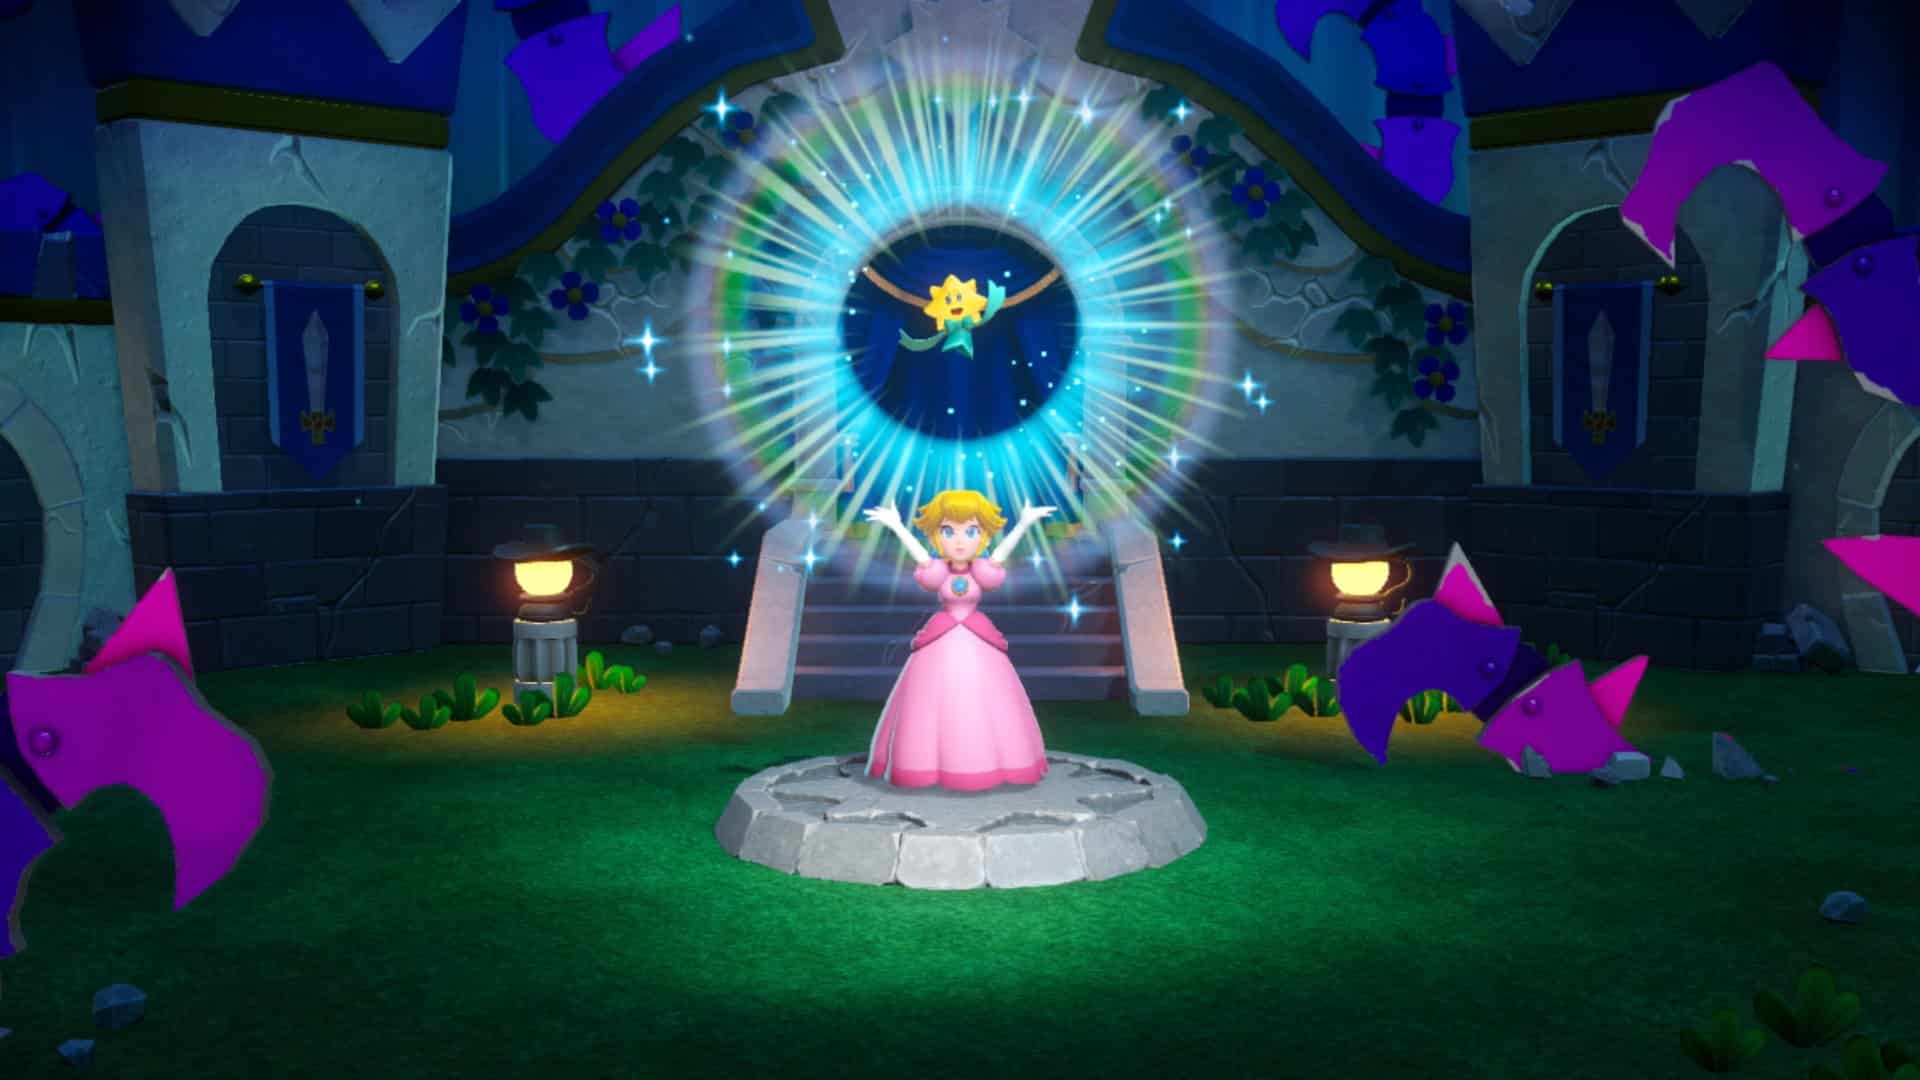 The new Princess Peach game is a chance for redemption